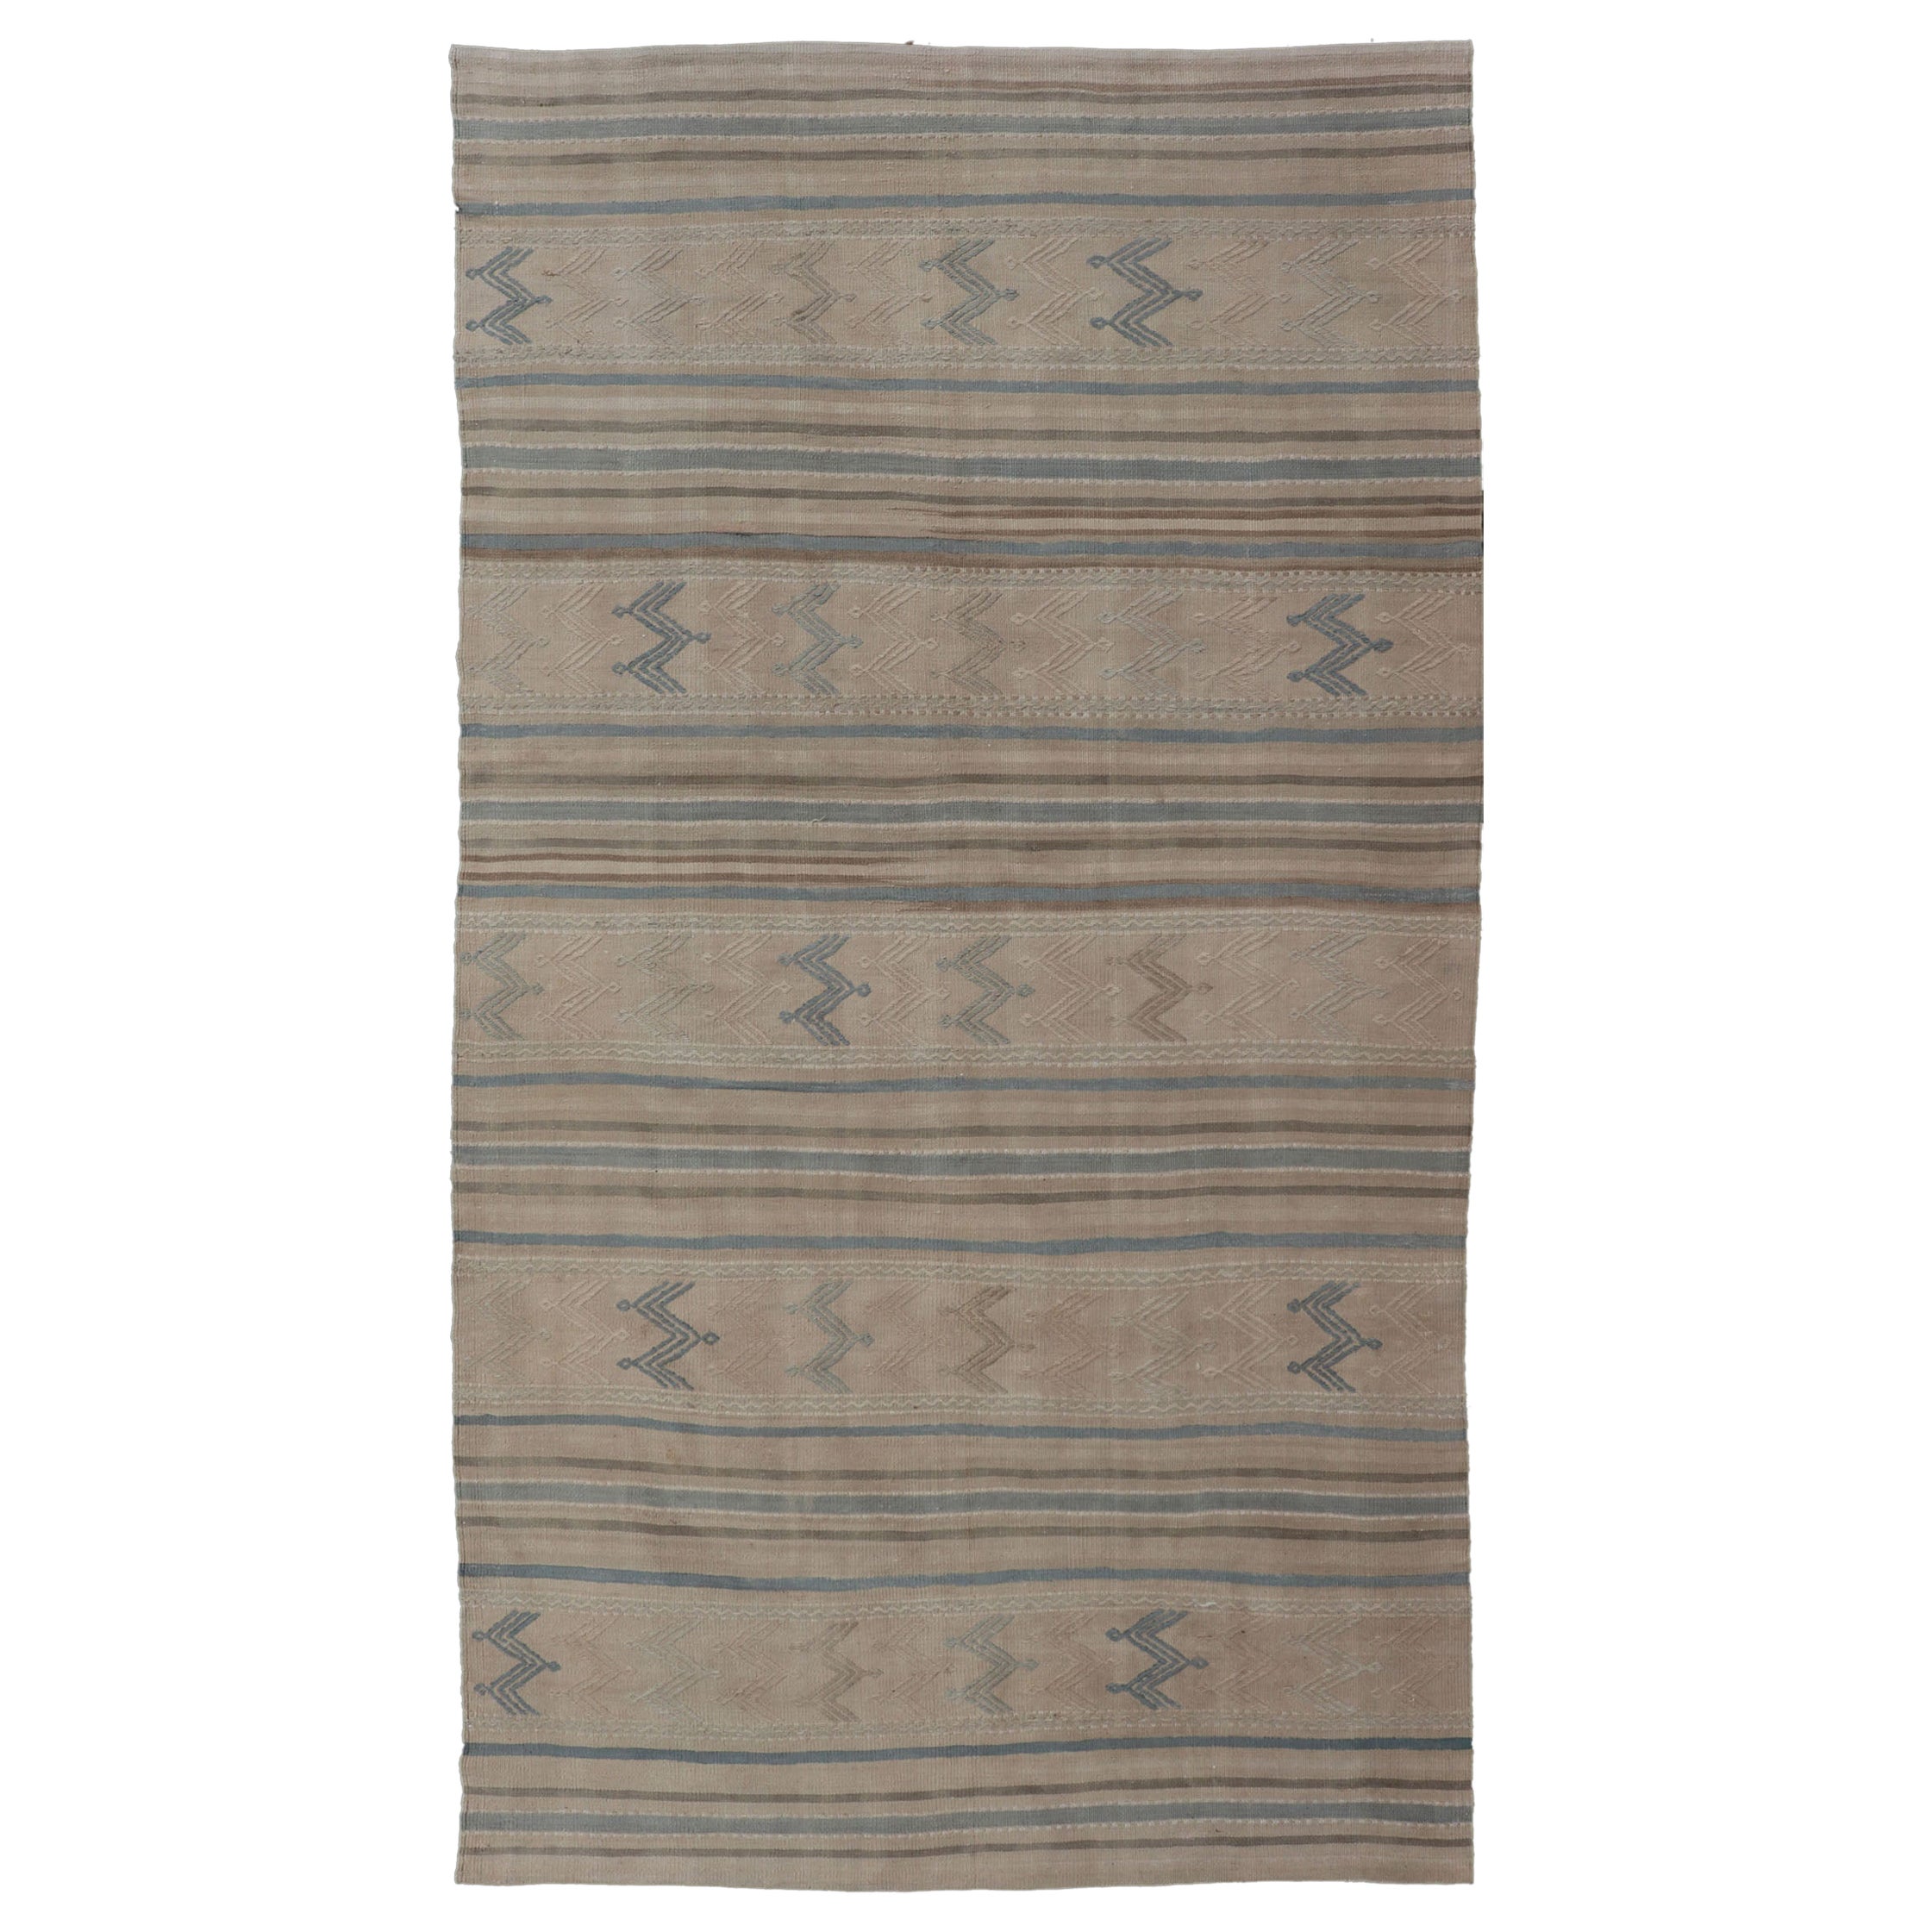 Turkish Vintage Kilim With Embroidered Motifs in Light Tan, Blue L. Brown For Sale